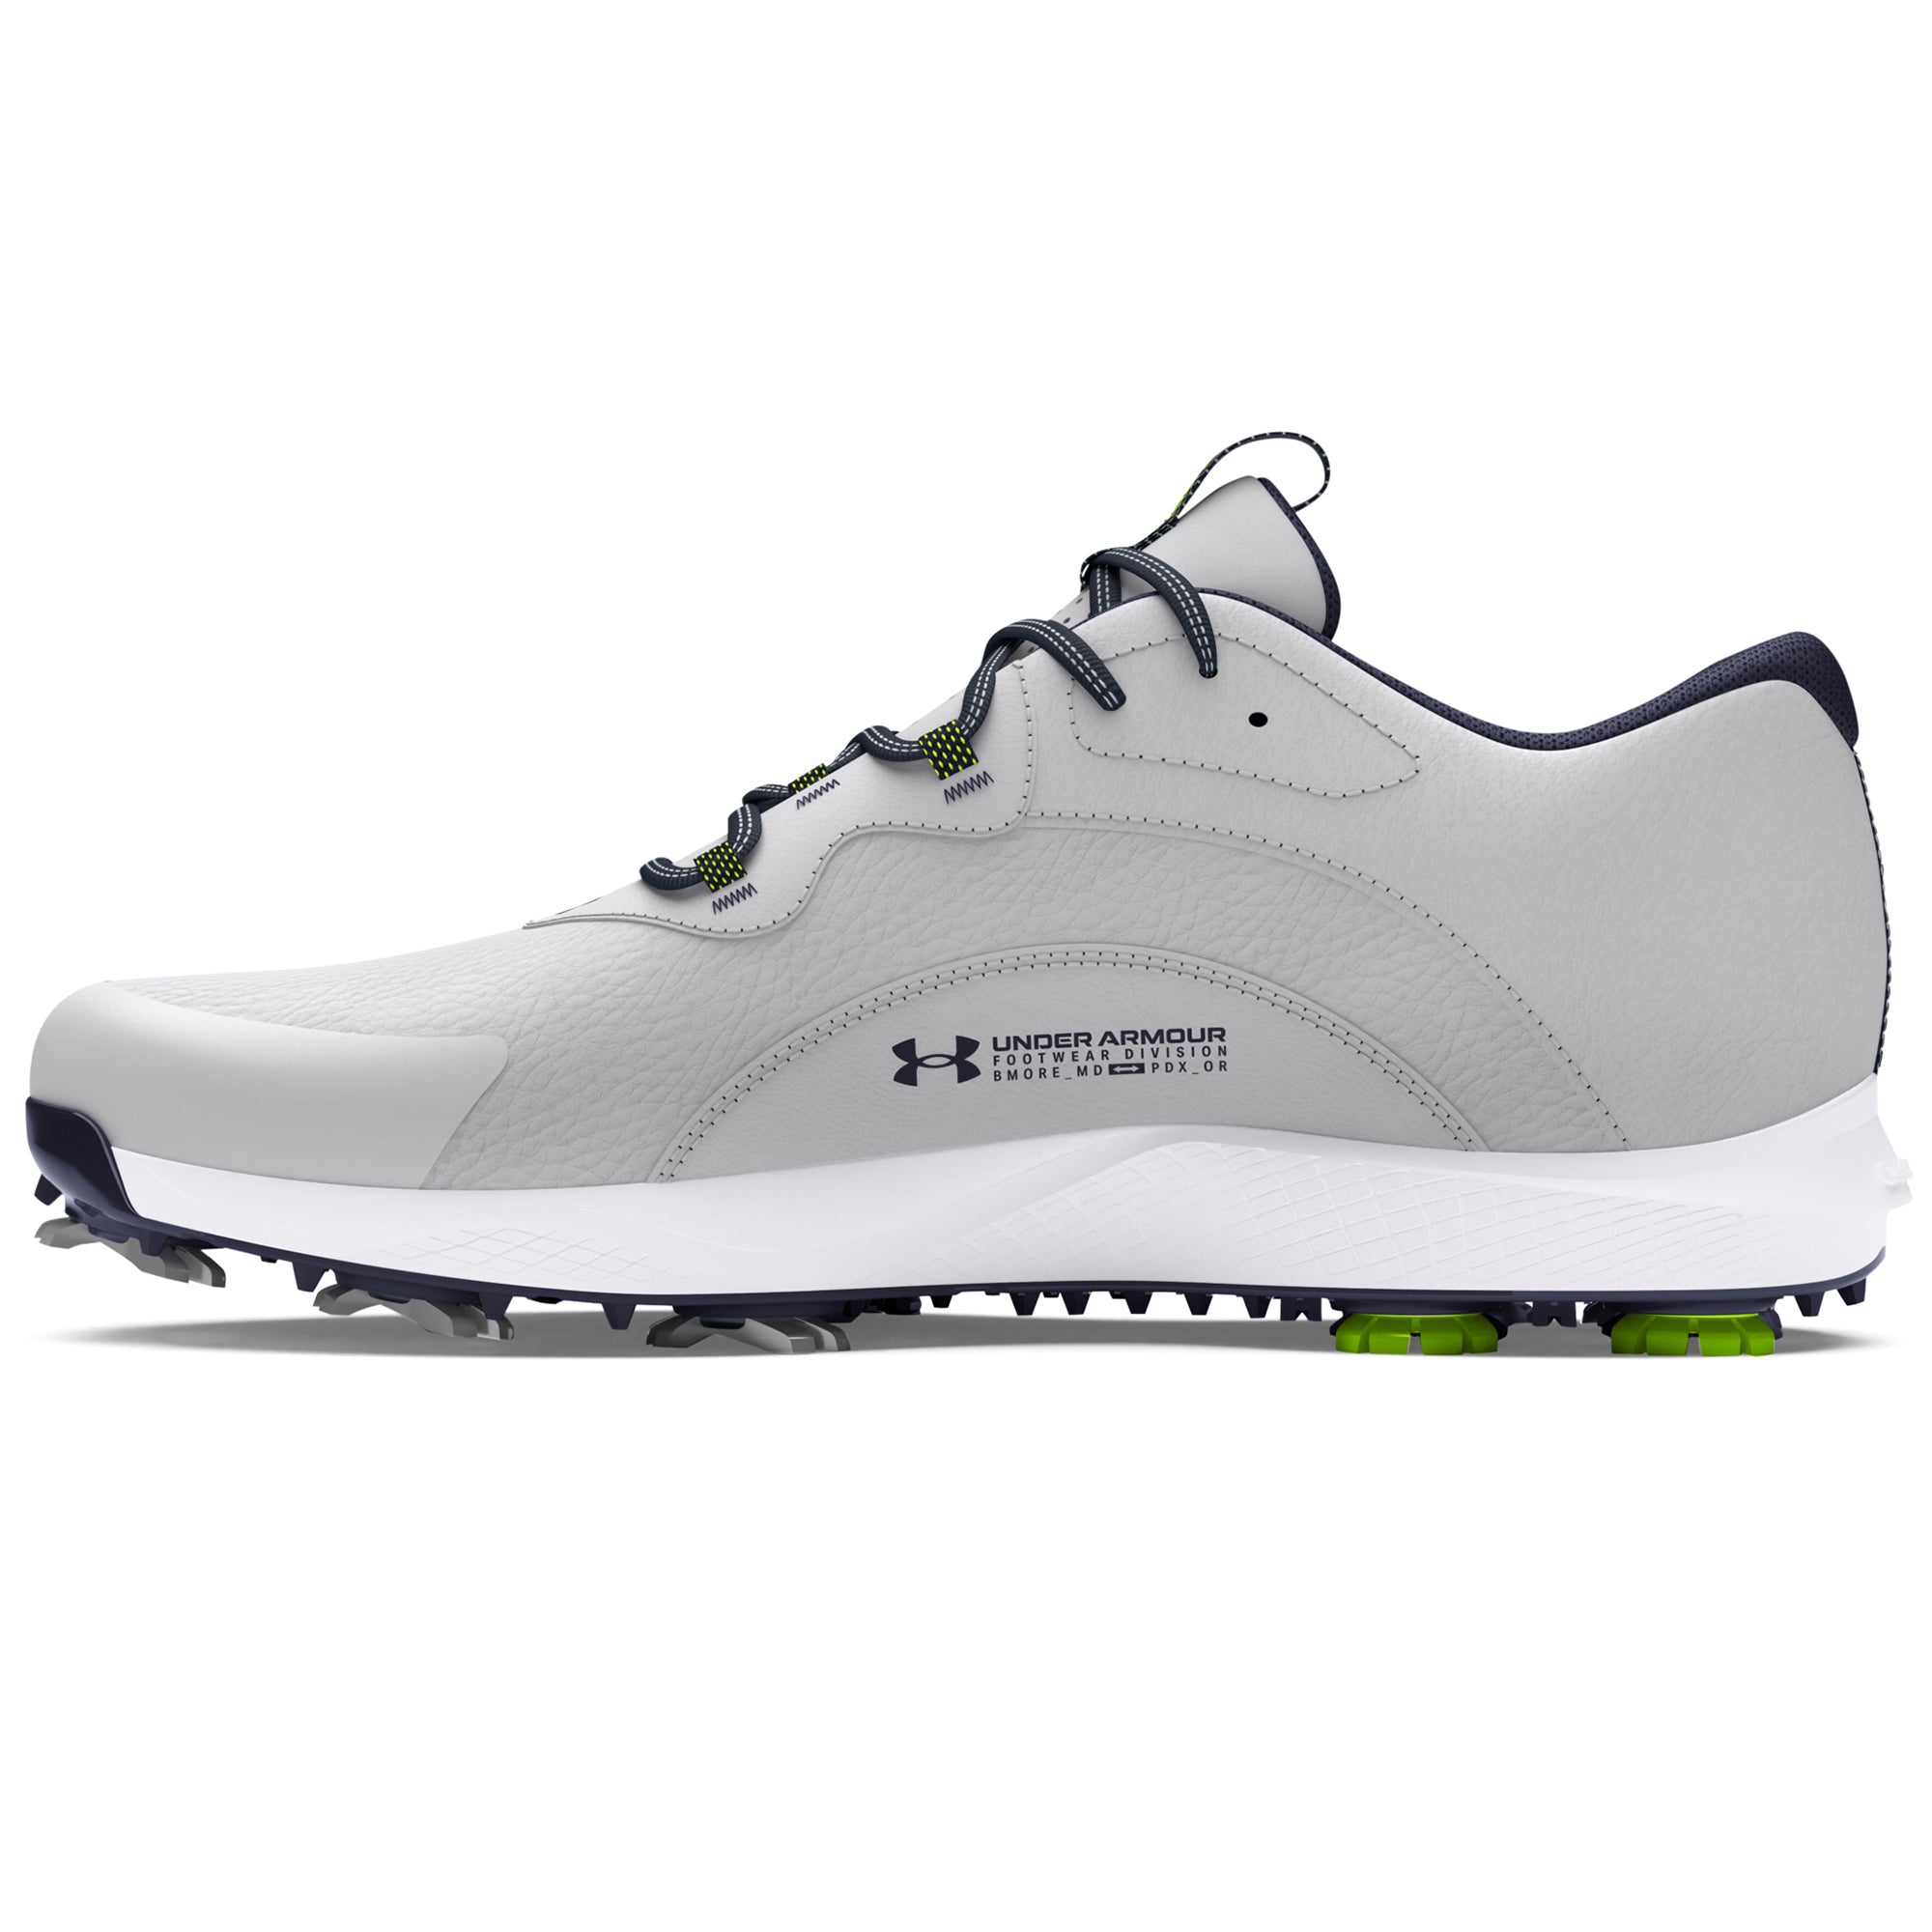 under-armour-charged-draw-2-e-golf-shoes-3026401-halo-grey-midnight-navy-102